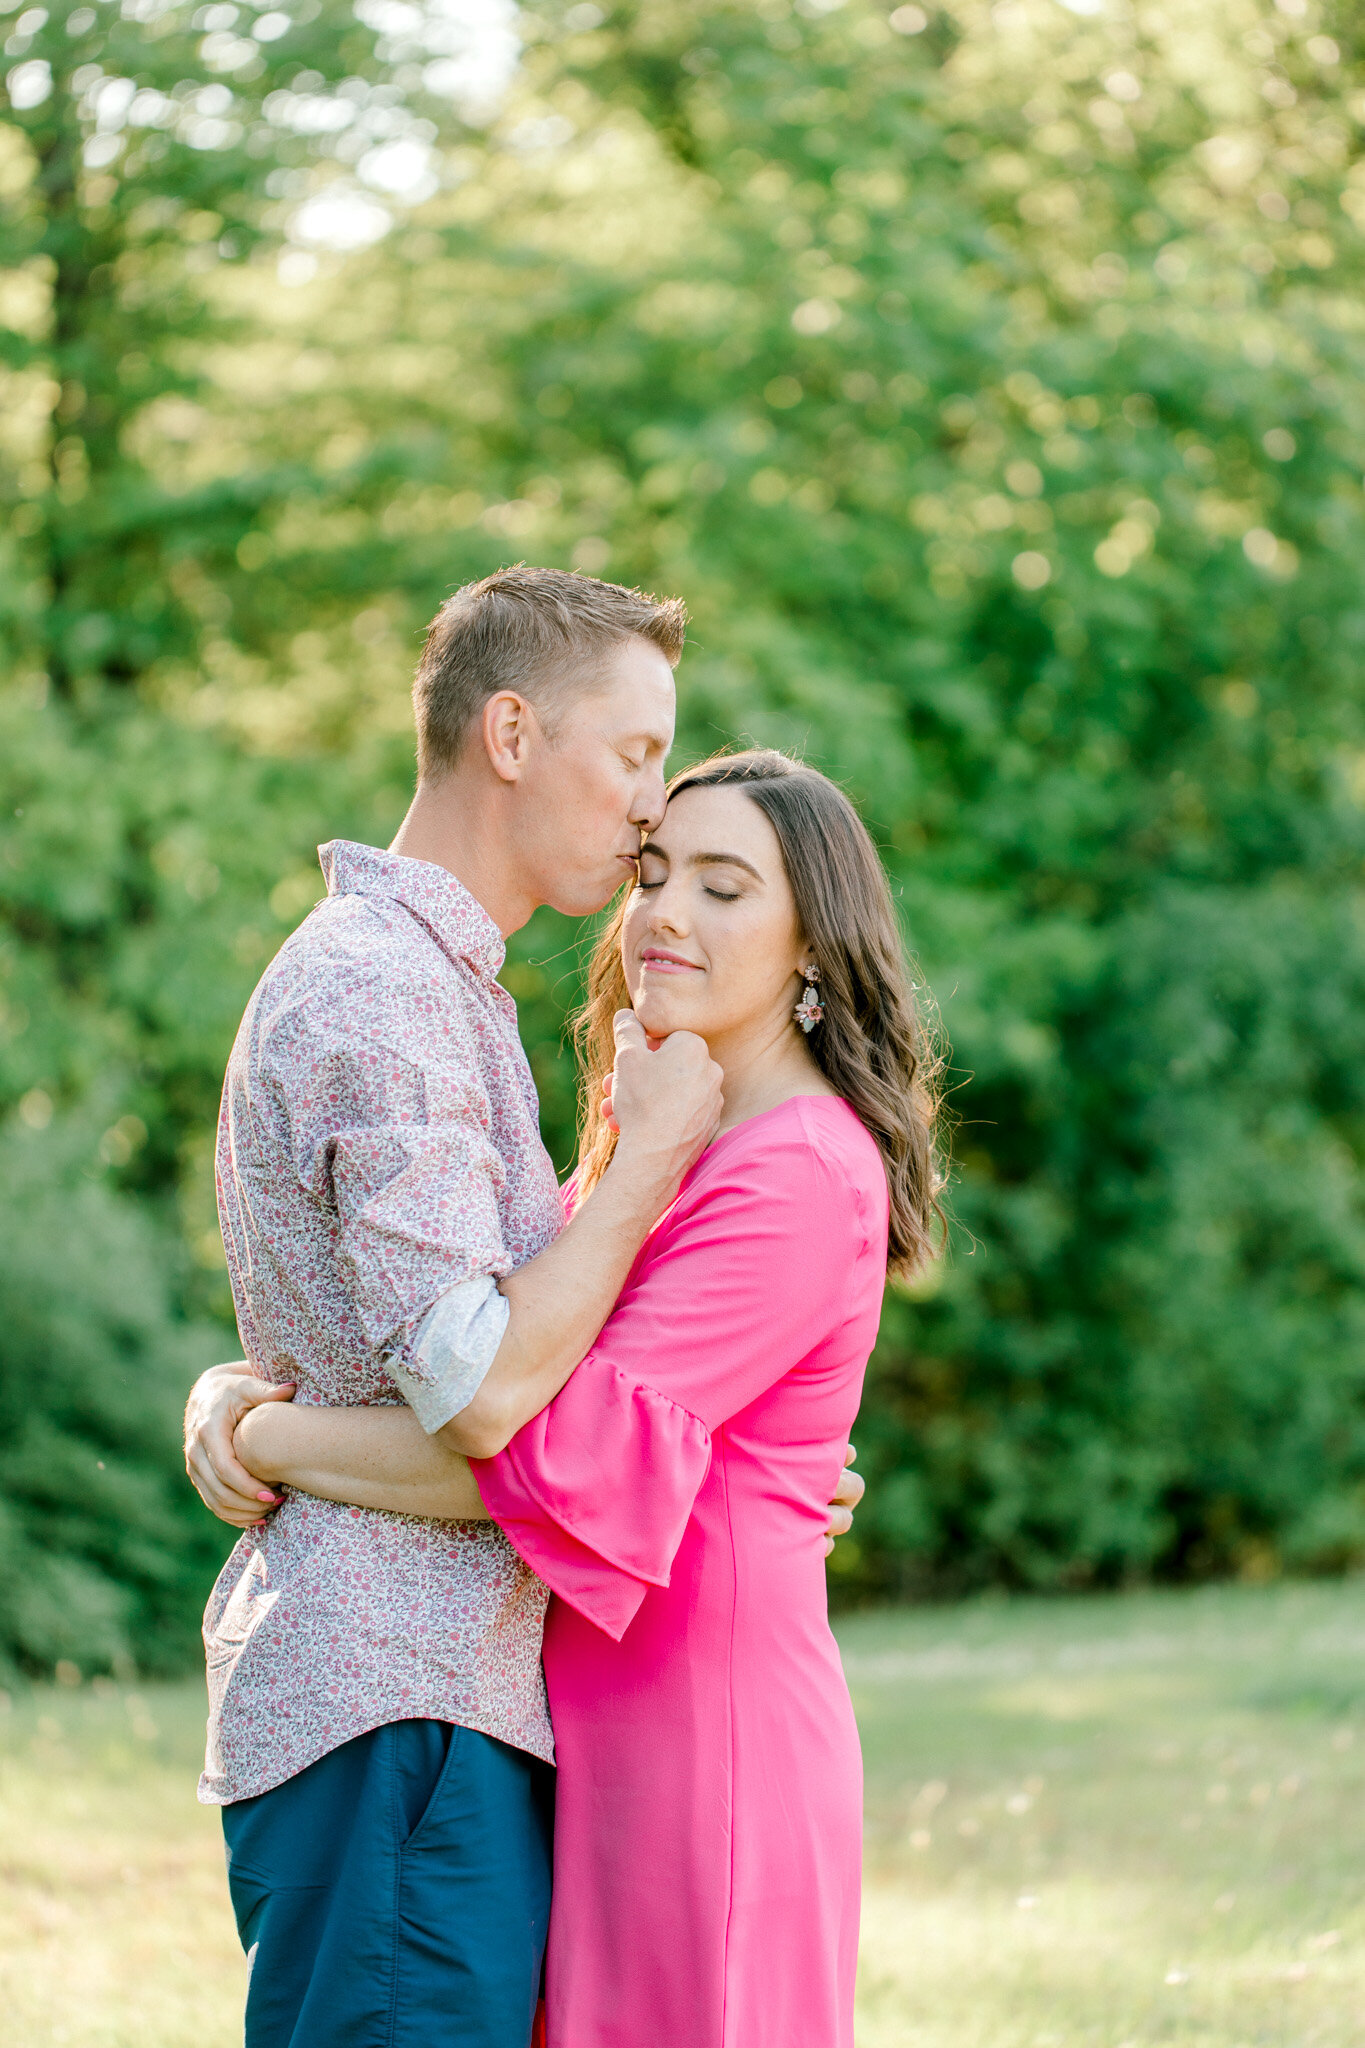 Colorful Engagement Session at the Orchard | Light and Airy Michigan Wedding Photographer